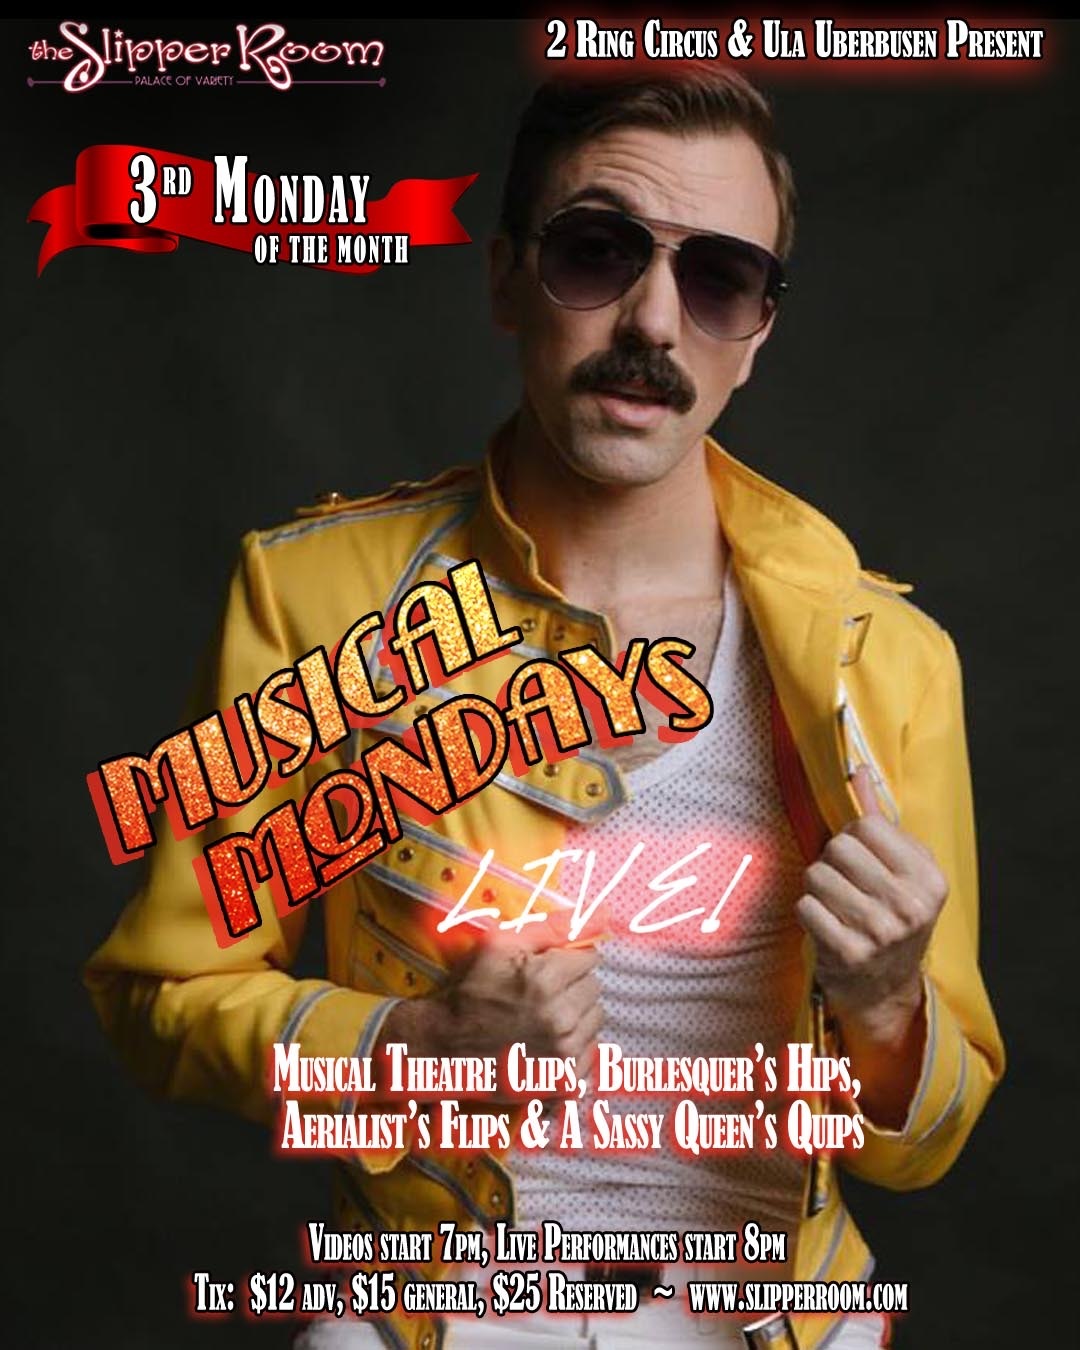 Monday, February 18th. Featuring the absolutely delightful Jack Barrow! ?????? Doors 7pm/Show 8pm. ?Musical Theatre Clips, Burlesquer?s Hips, Aerialist?s Flips, & A Sassy Queen?s Quips? Discounted advance tickets at ? slipperroomnyc(dot)com ????? #musicalmondayslive is presented by @ulauberbusen & @2ringcircus and continues on the 3rd Monday of the month at the @slipperroomnyc. The February 18 edition features performances by @eve.starr @iambenfranklin @aerialjosh @ulauberbusen @mr.jackbarrow & @_theivoryfox_ ? ? ? #musicalmondays #live #burlesque #boylesque #nycburlesque #cabaret #dragqueen #nycdrag #nycnightlife #burlesqueshow #singalong #broadway #musicaltheatre #showtunes #2ringcircus #nyc #circus #aerial #thingstodonyc #mondaynight #slipperroom #slipperroomnyc #liveentertainment